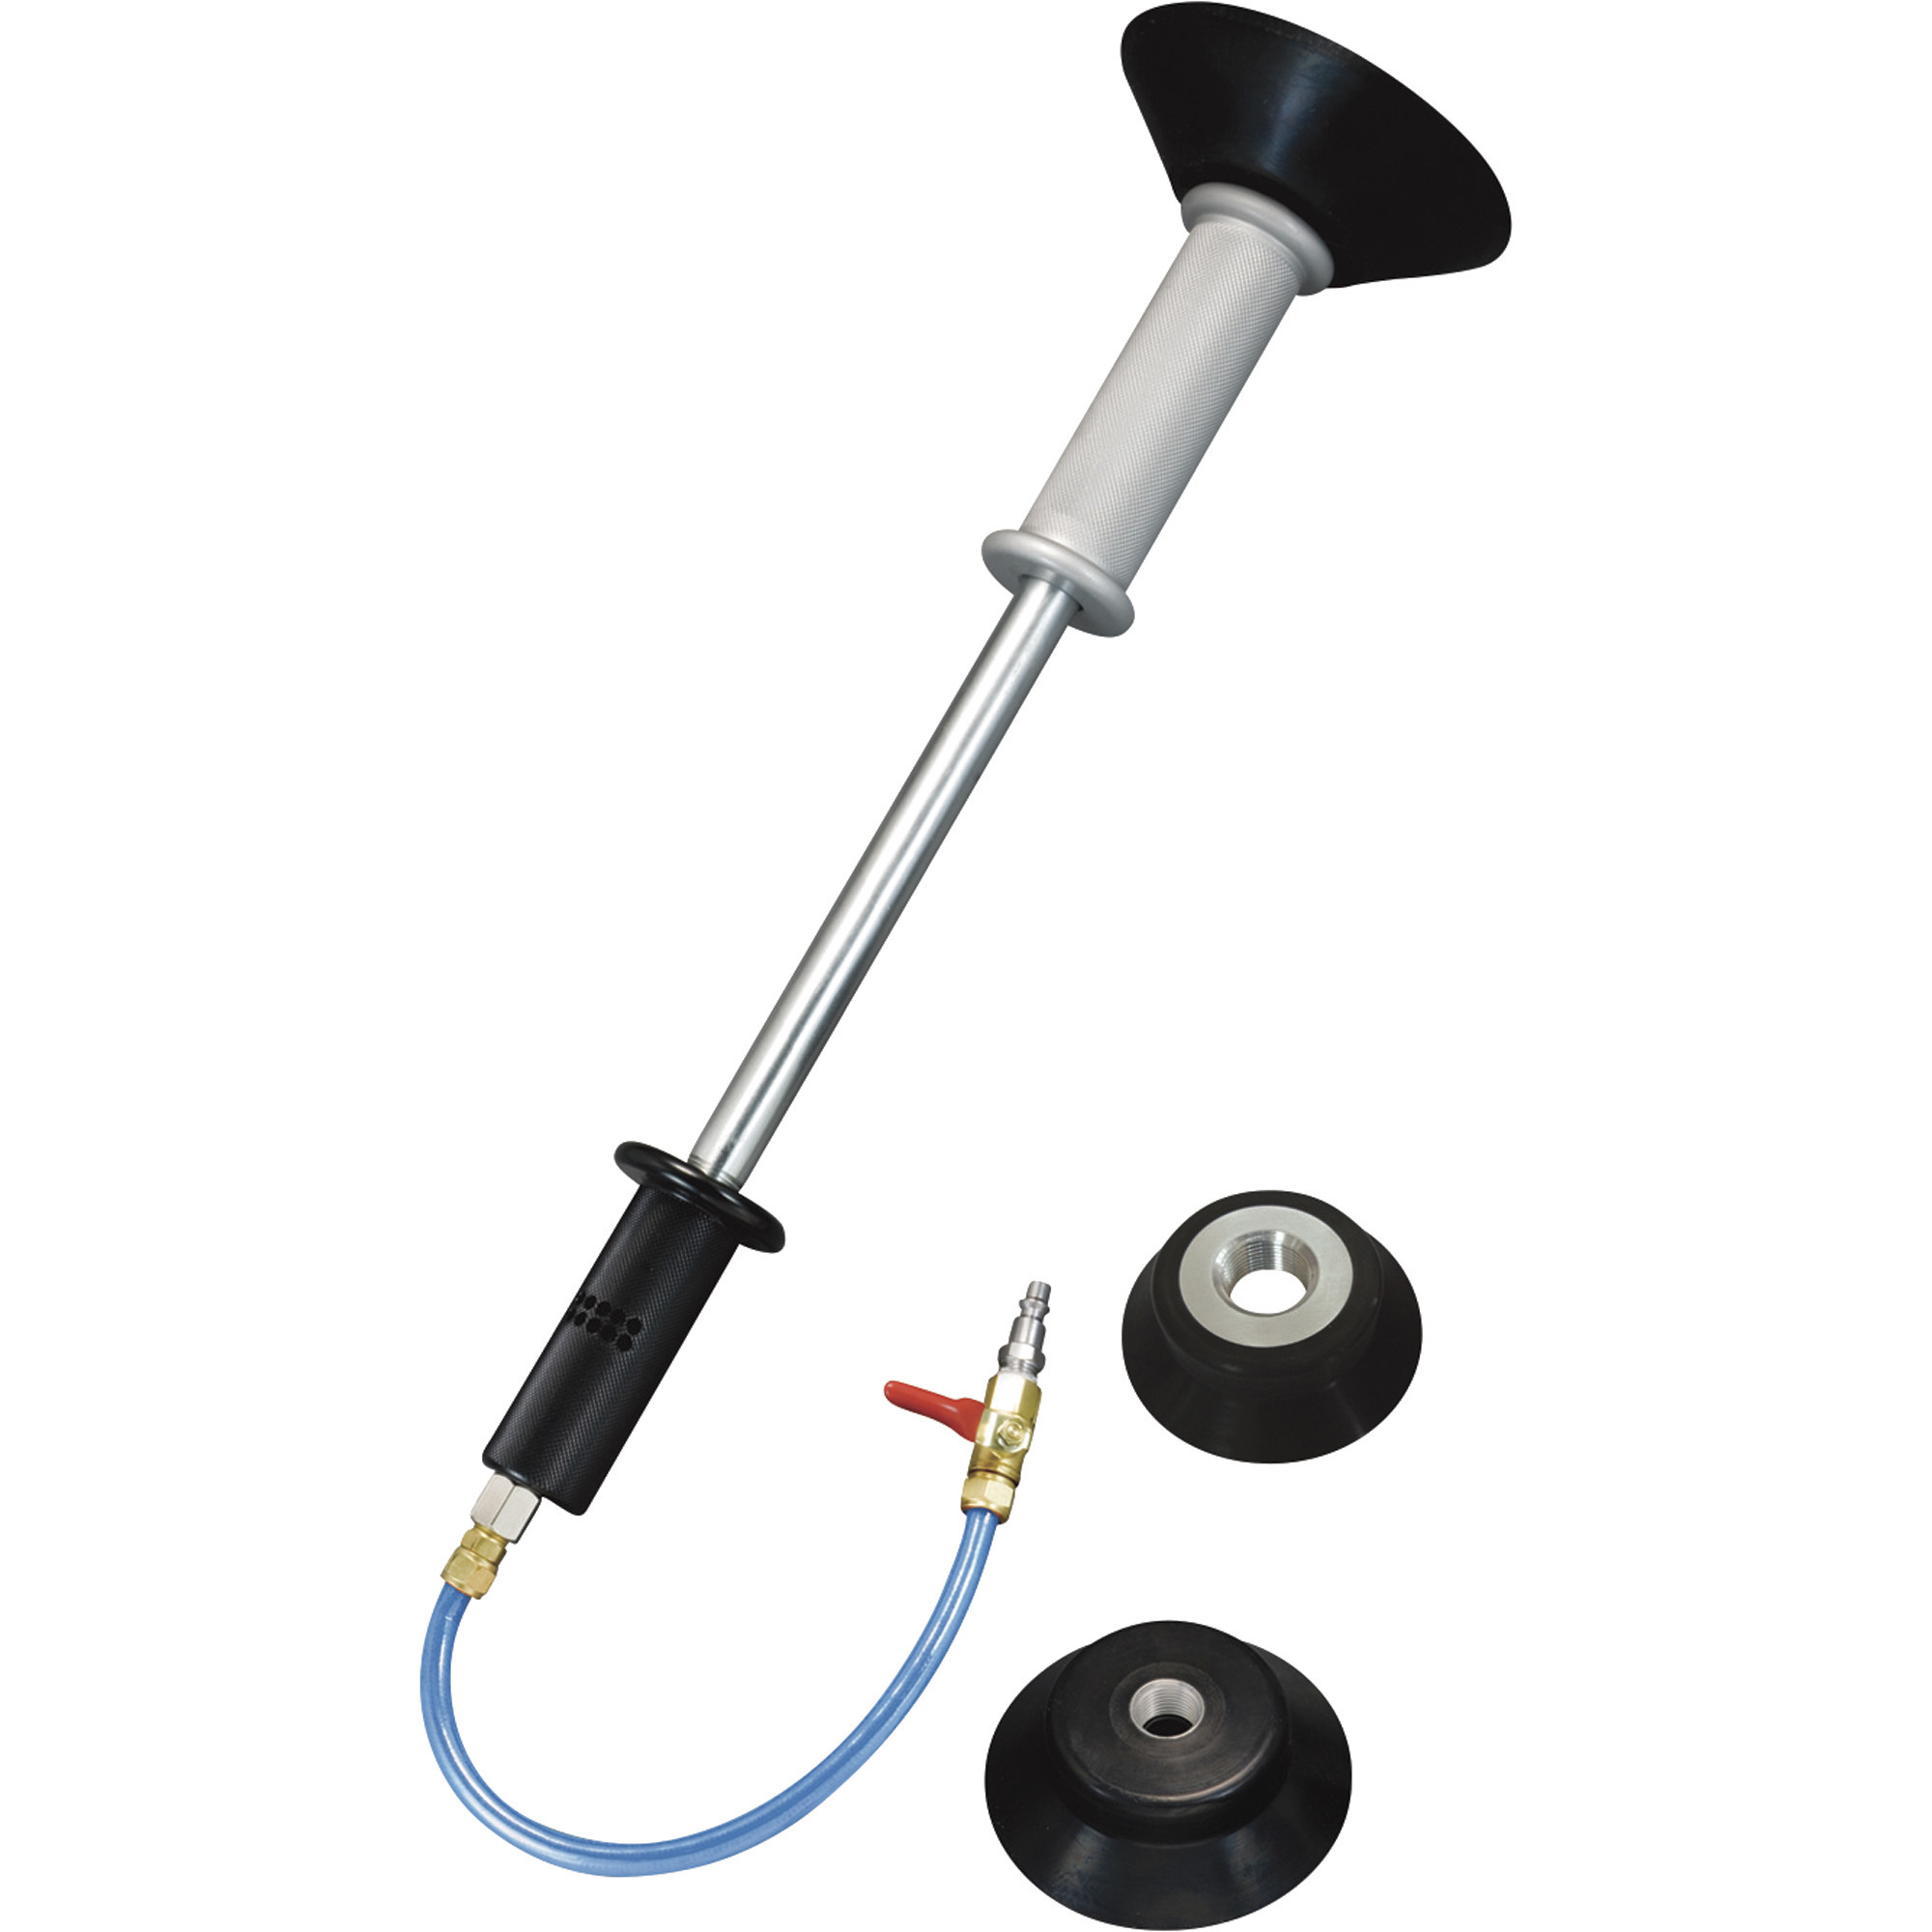 3M Suction Cup Dent Puller